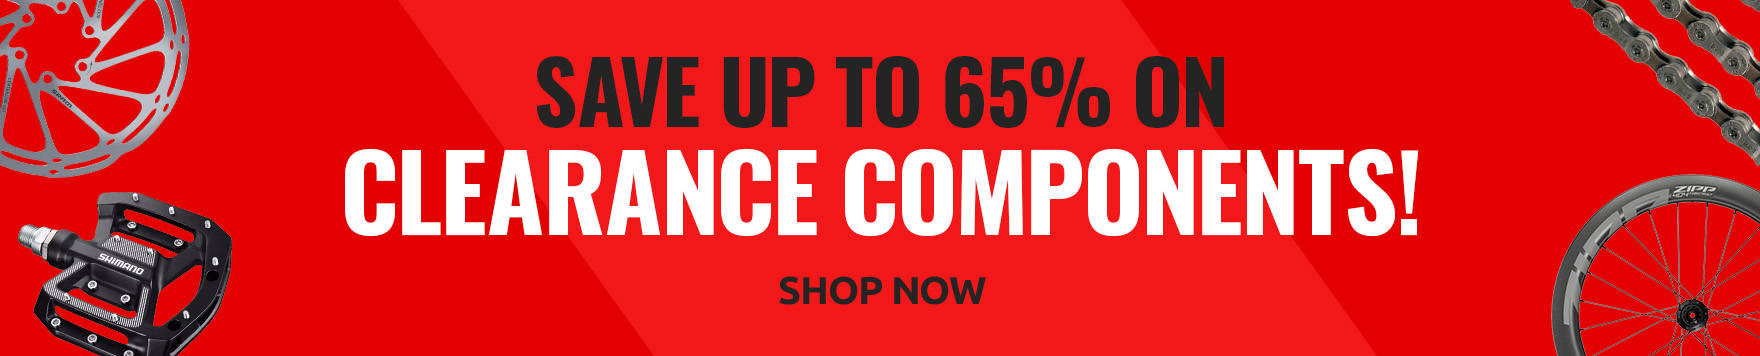 Save up to 65% on clearance components